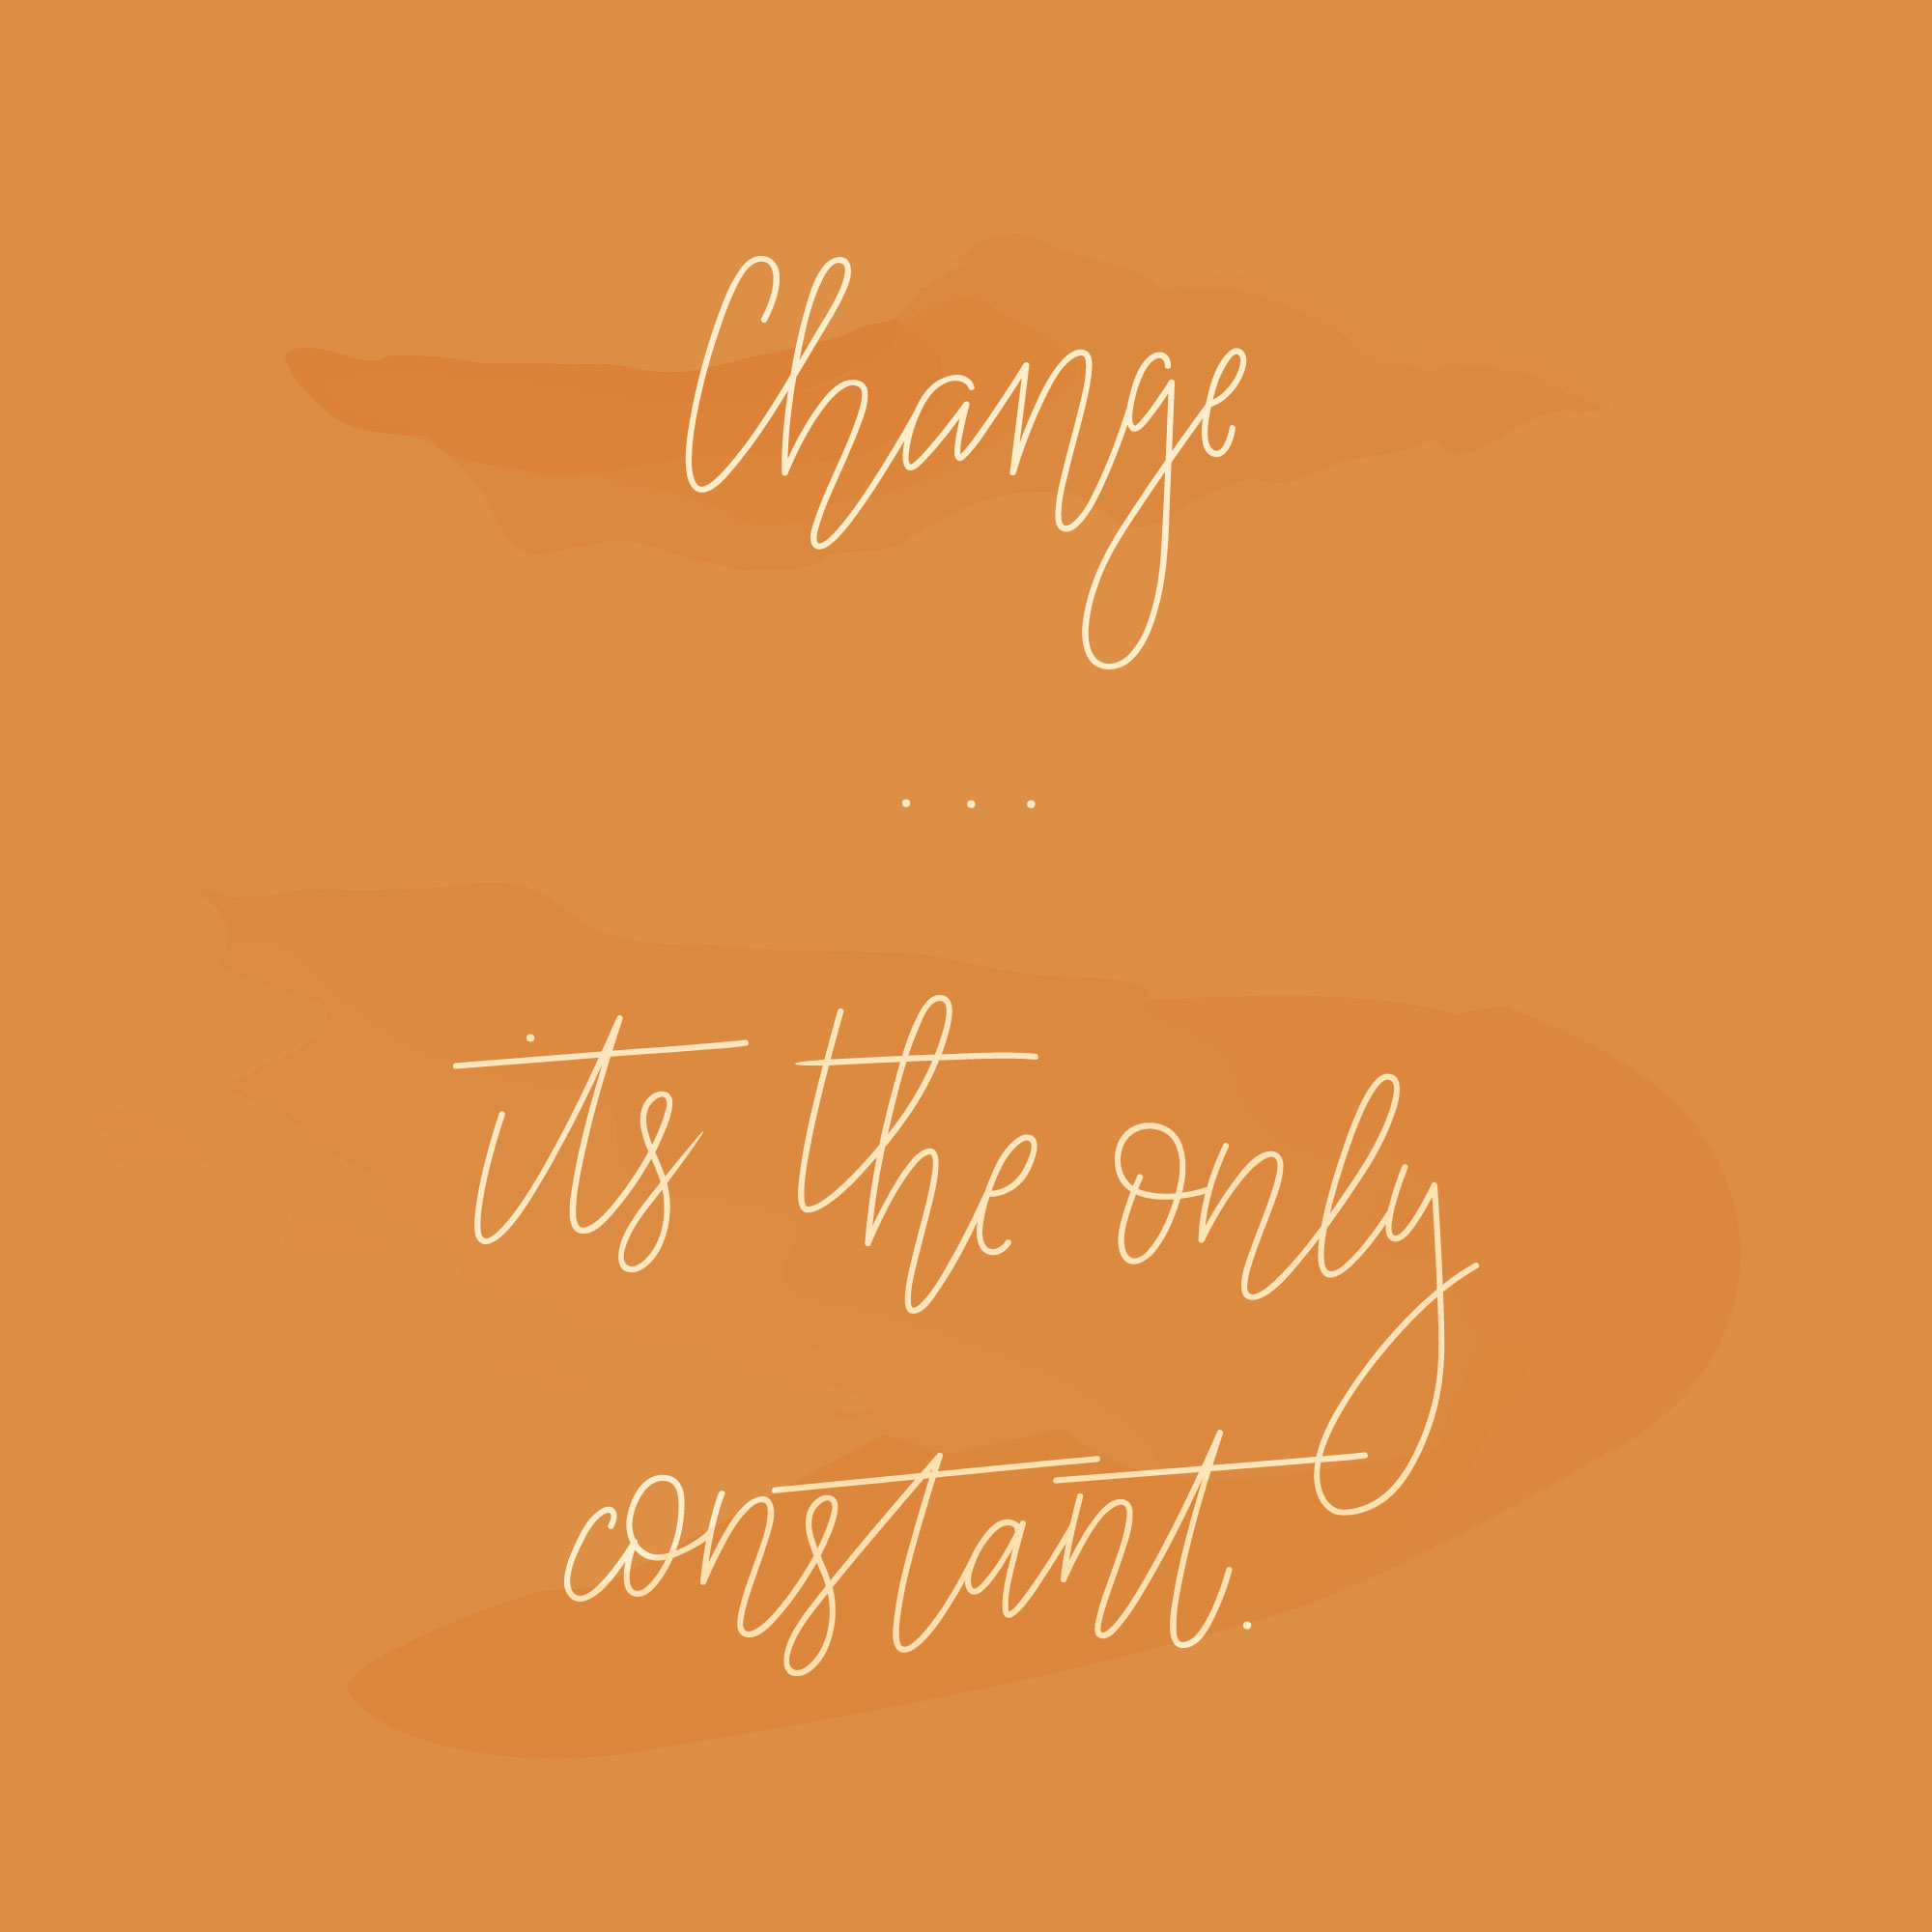 Change. It's the only constant.